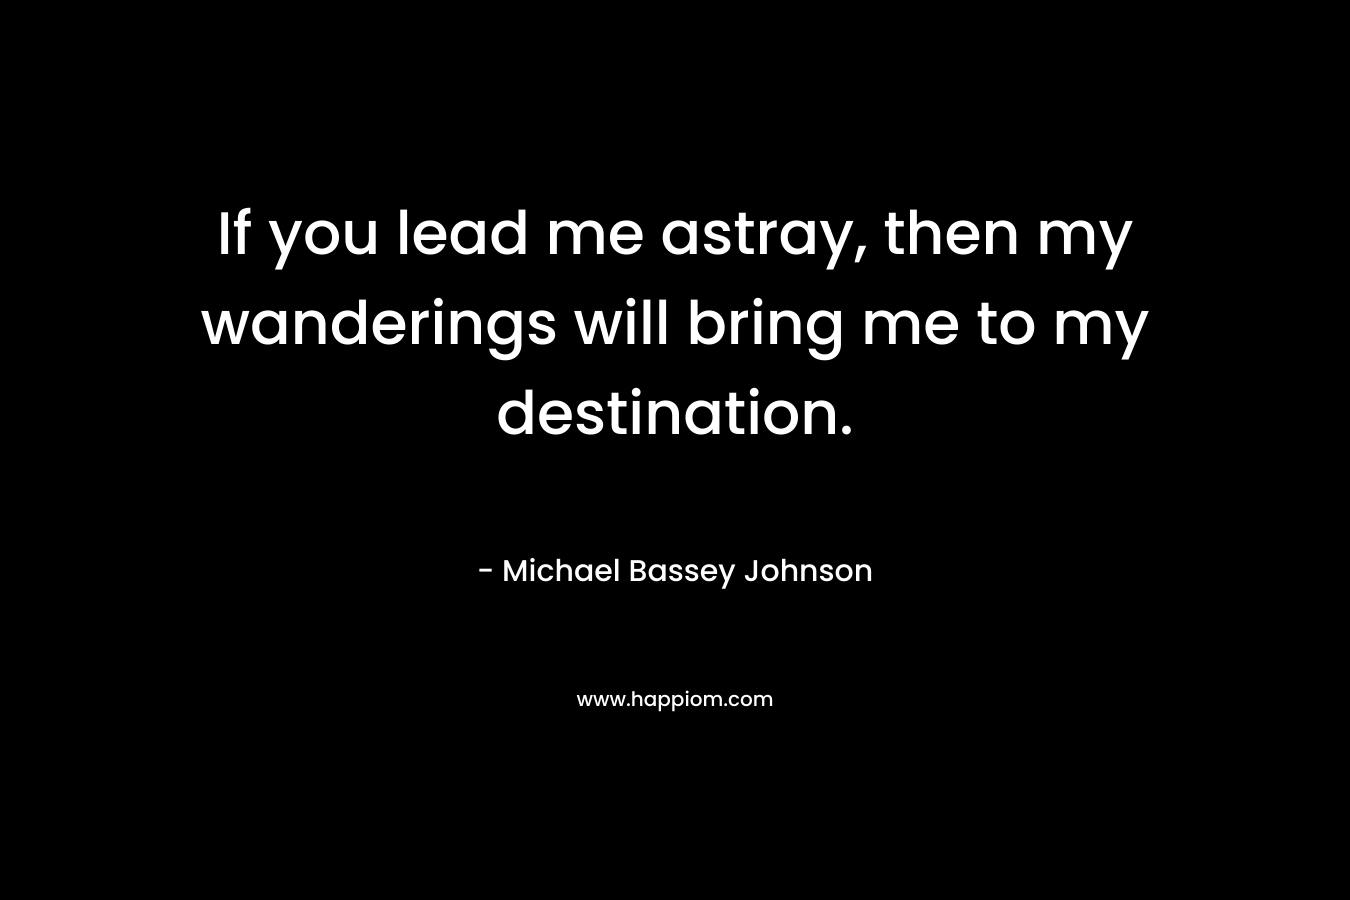 If you lead me astray, then my wanderings will bring me to my destination. – Michael Bassey Johnson